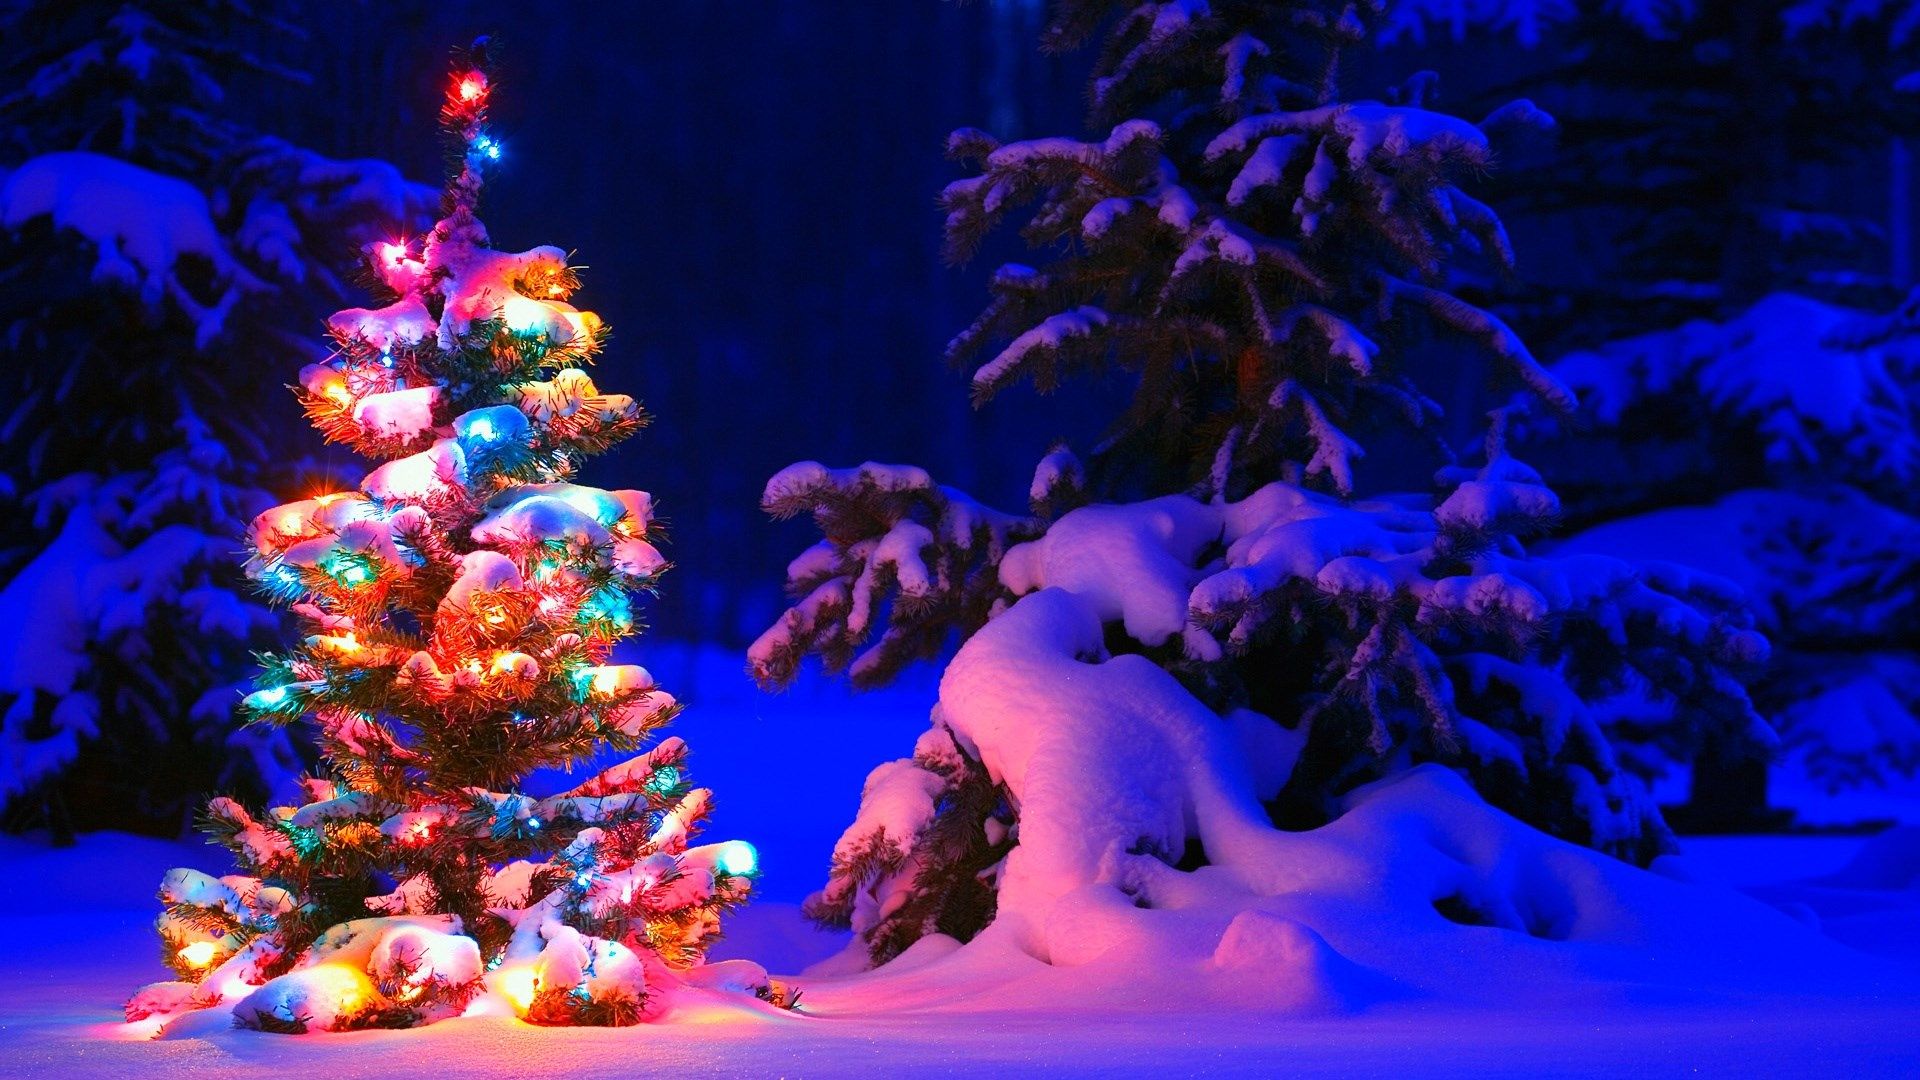 Christmas Tree In Snow , HD Wallpaper & Backgrounds